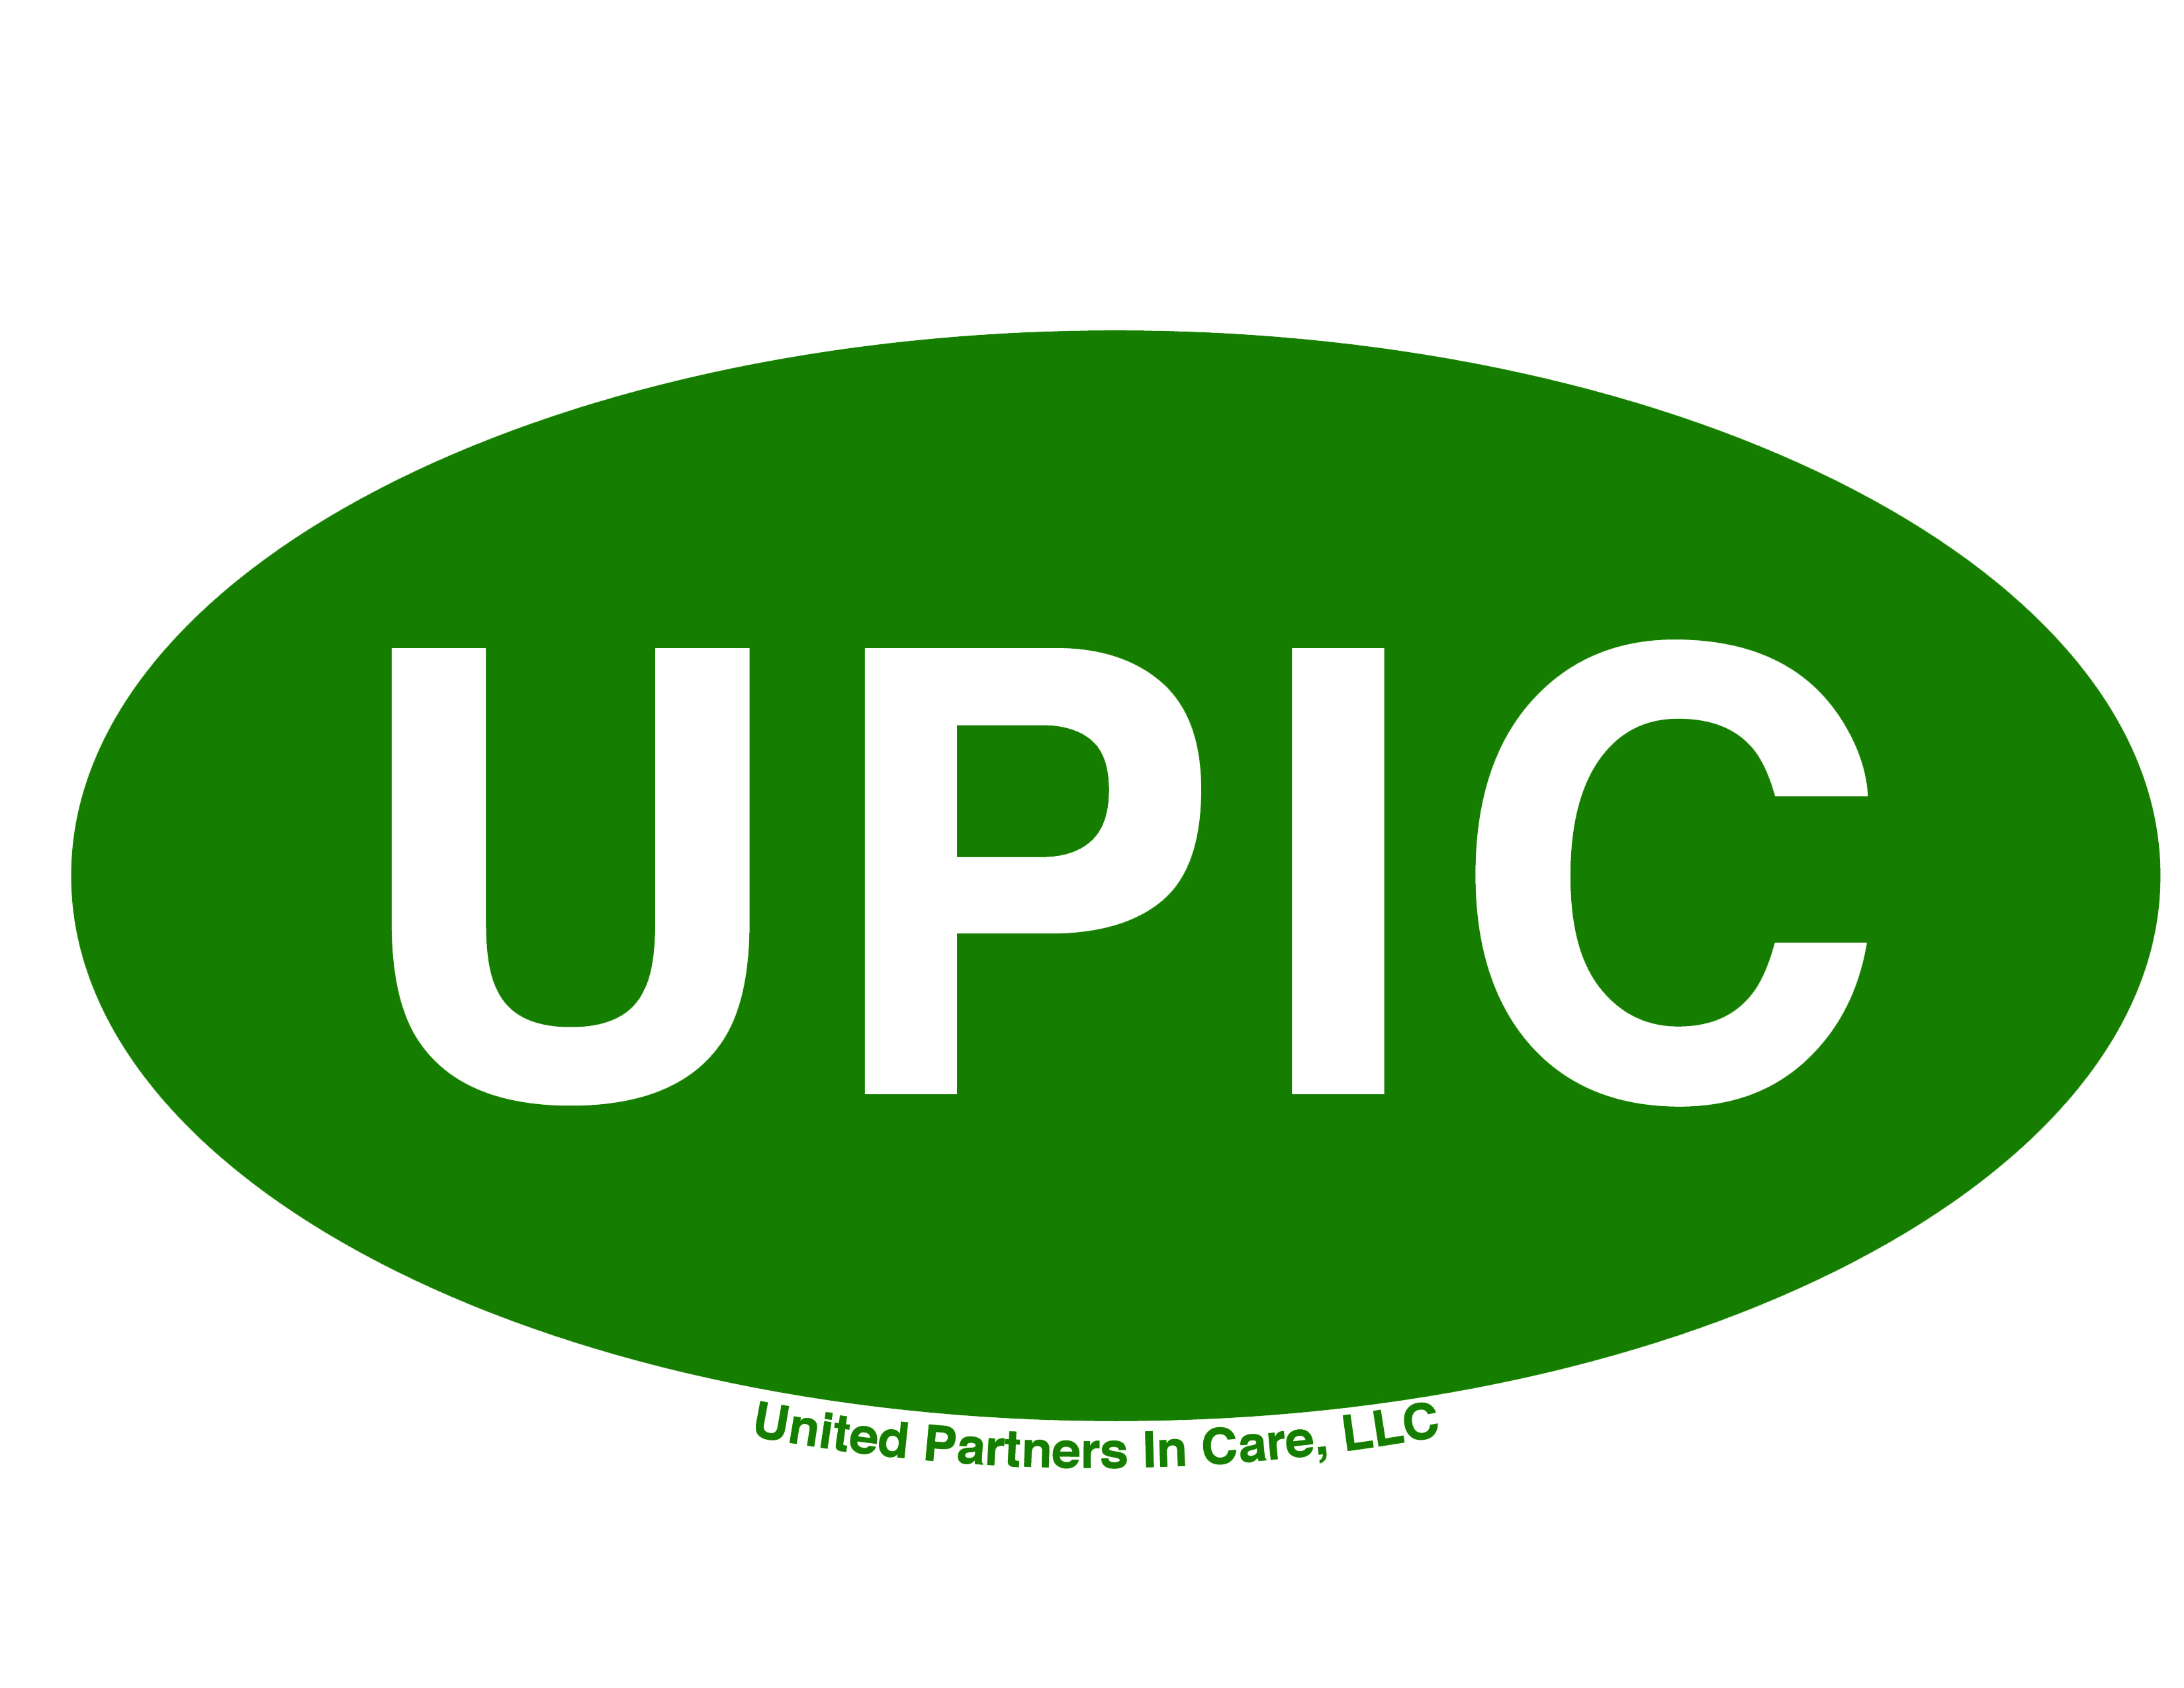 United Partners In Care, LLC